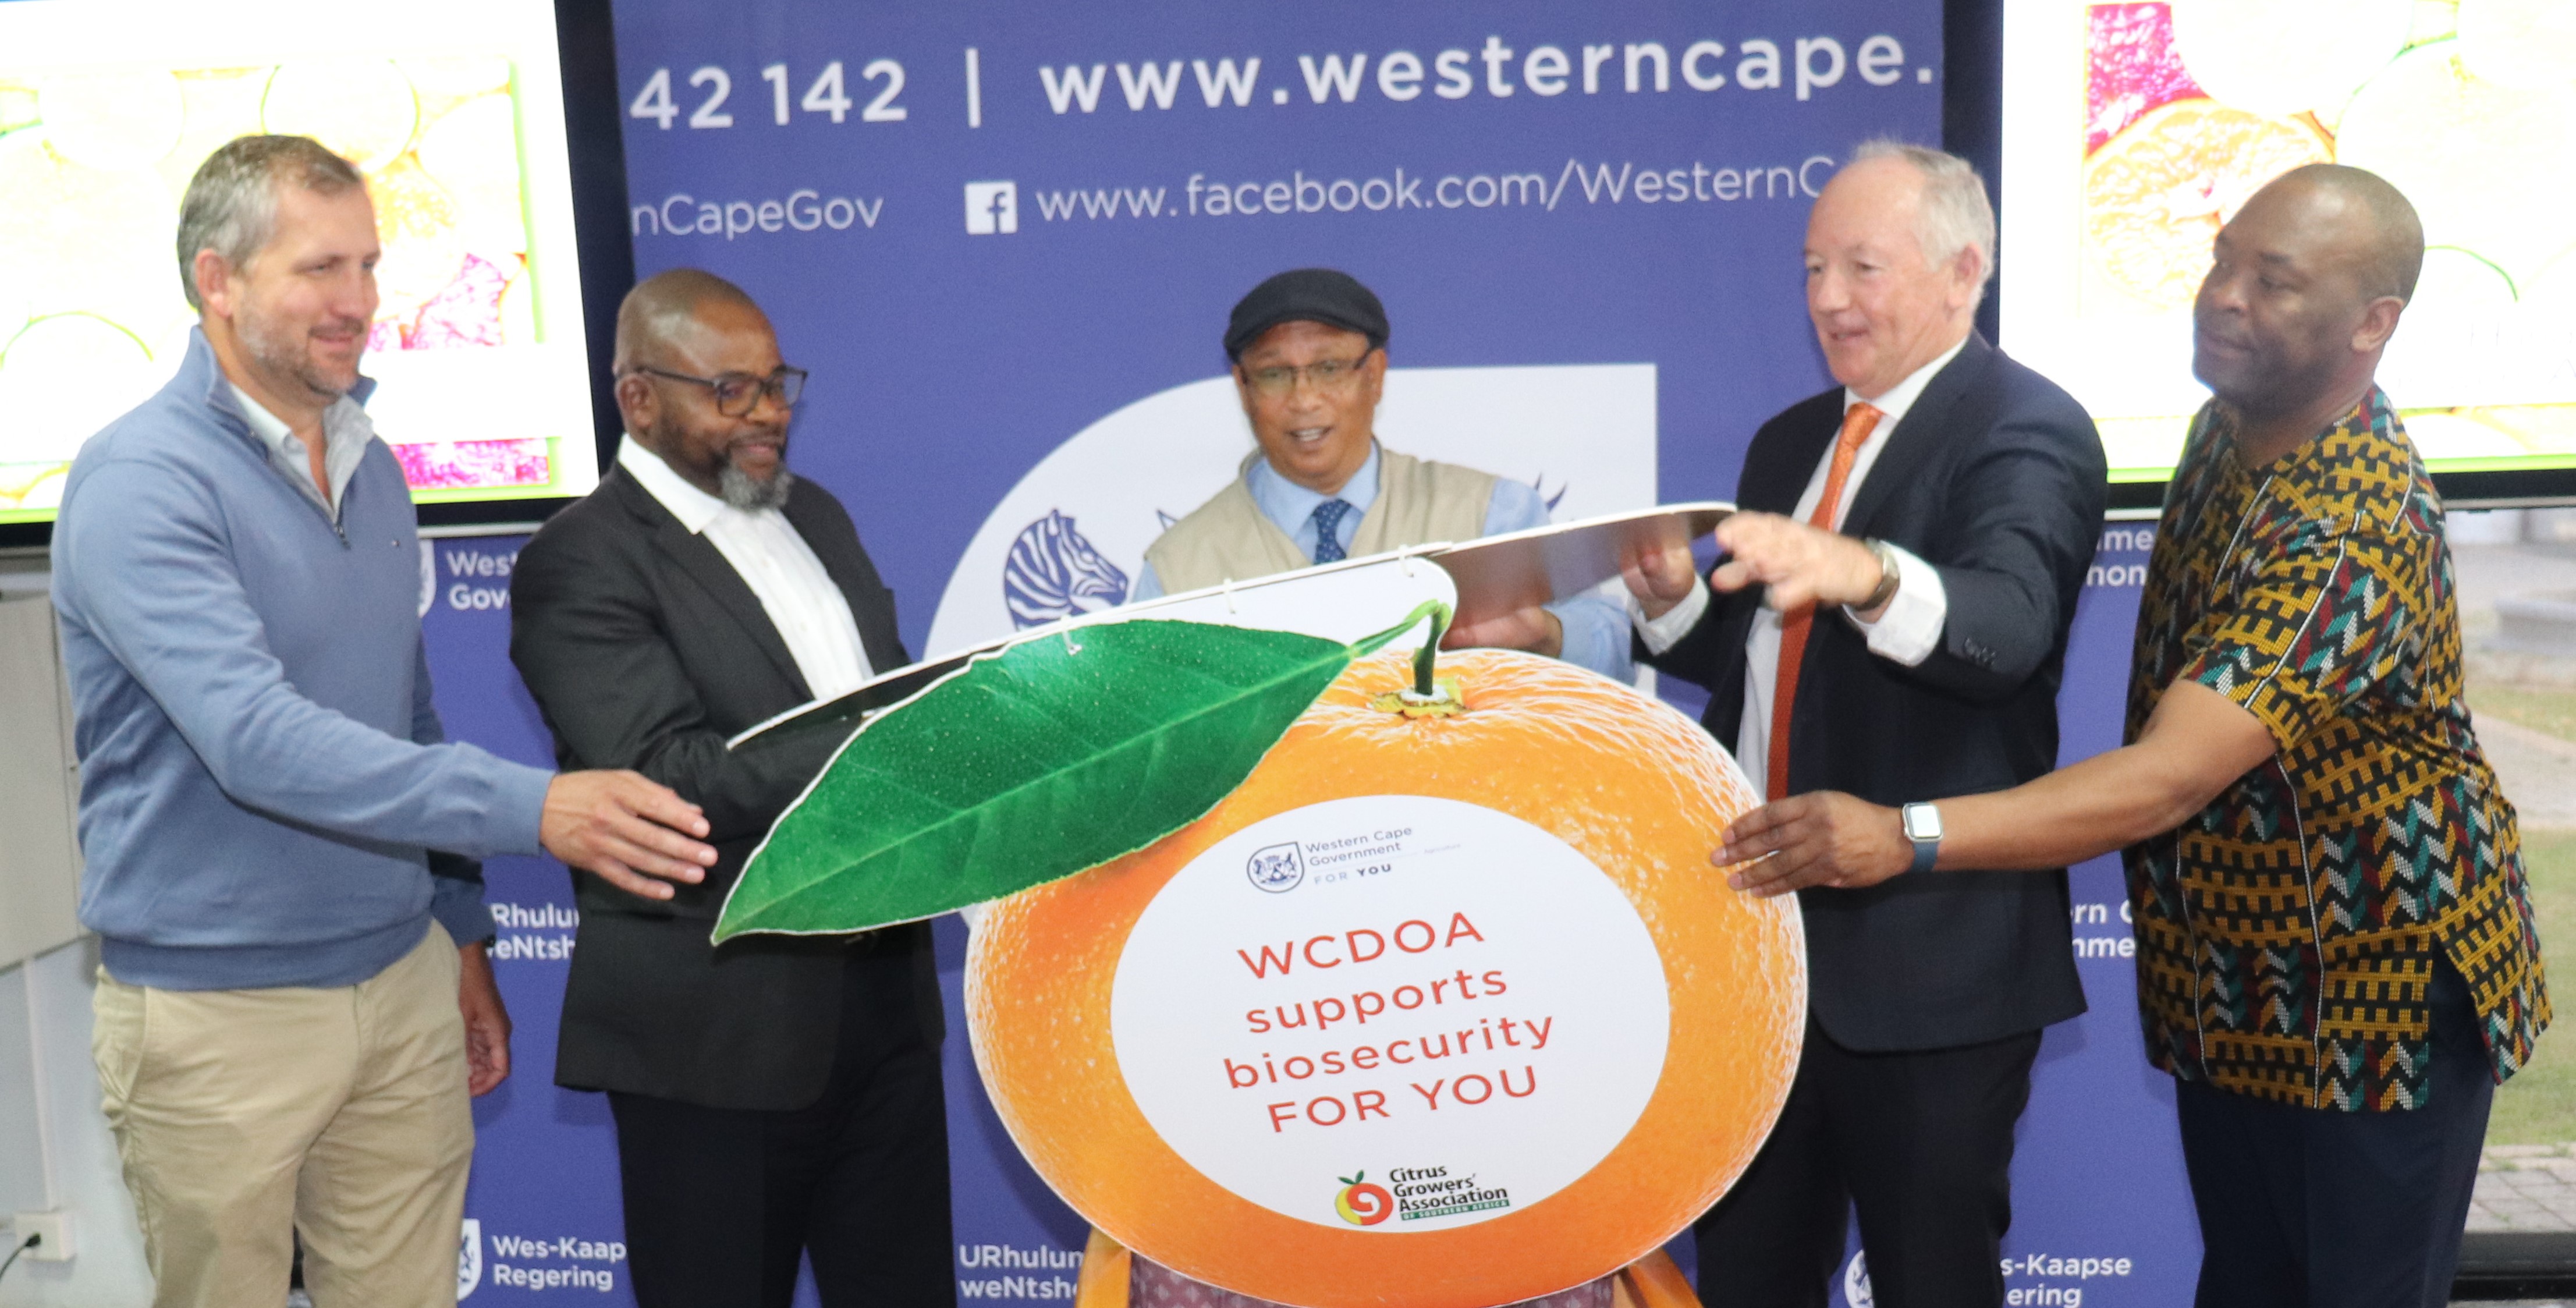 Photo – Left to right. Gerrit van der Merwe: Chairperson of the Citrus Growers Board Dr Mogale Sebopetsa: Head of Department: Western Cape Department of Agriculture Dr Ivan Meyer -  Western Cape Provincial Minister of Agriculture,  Justin Chadwick: CEO, C